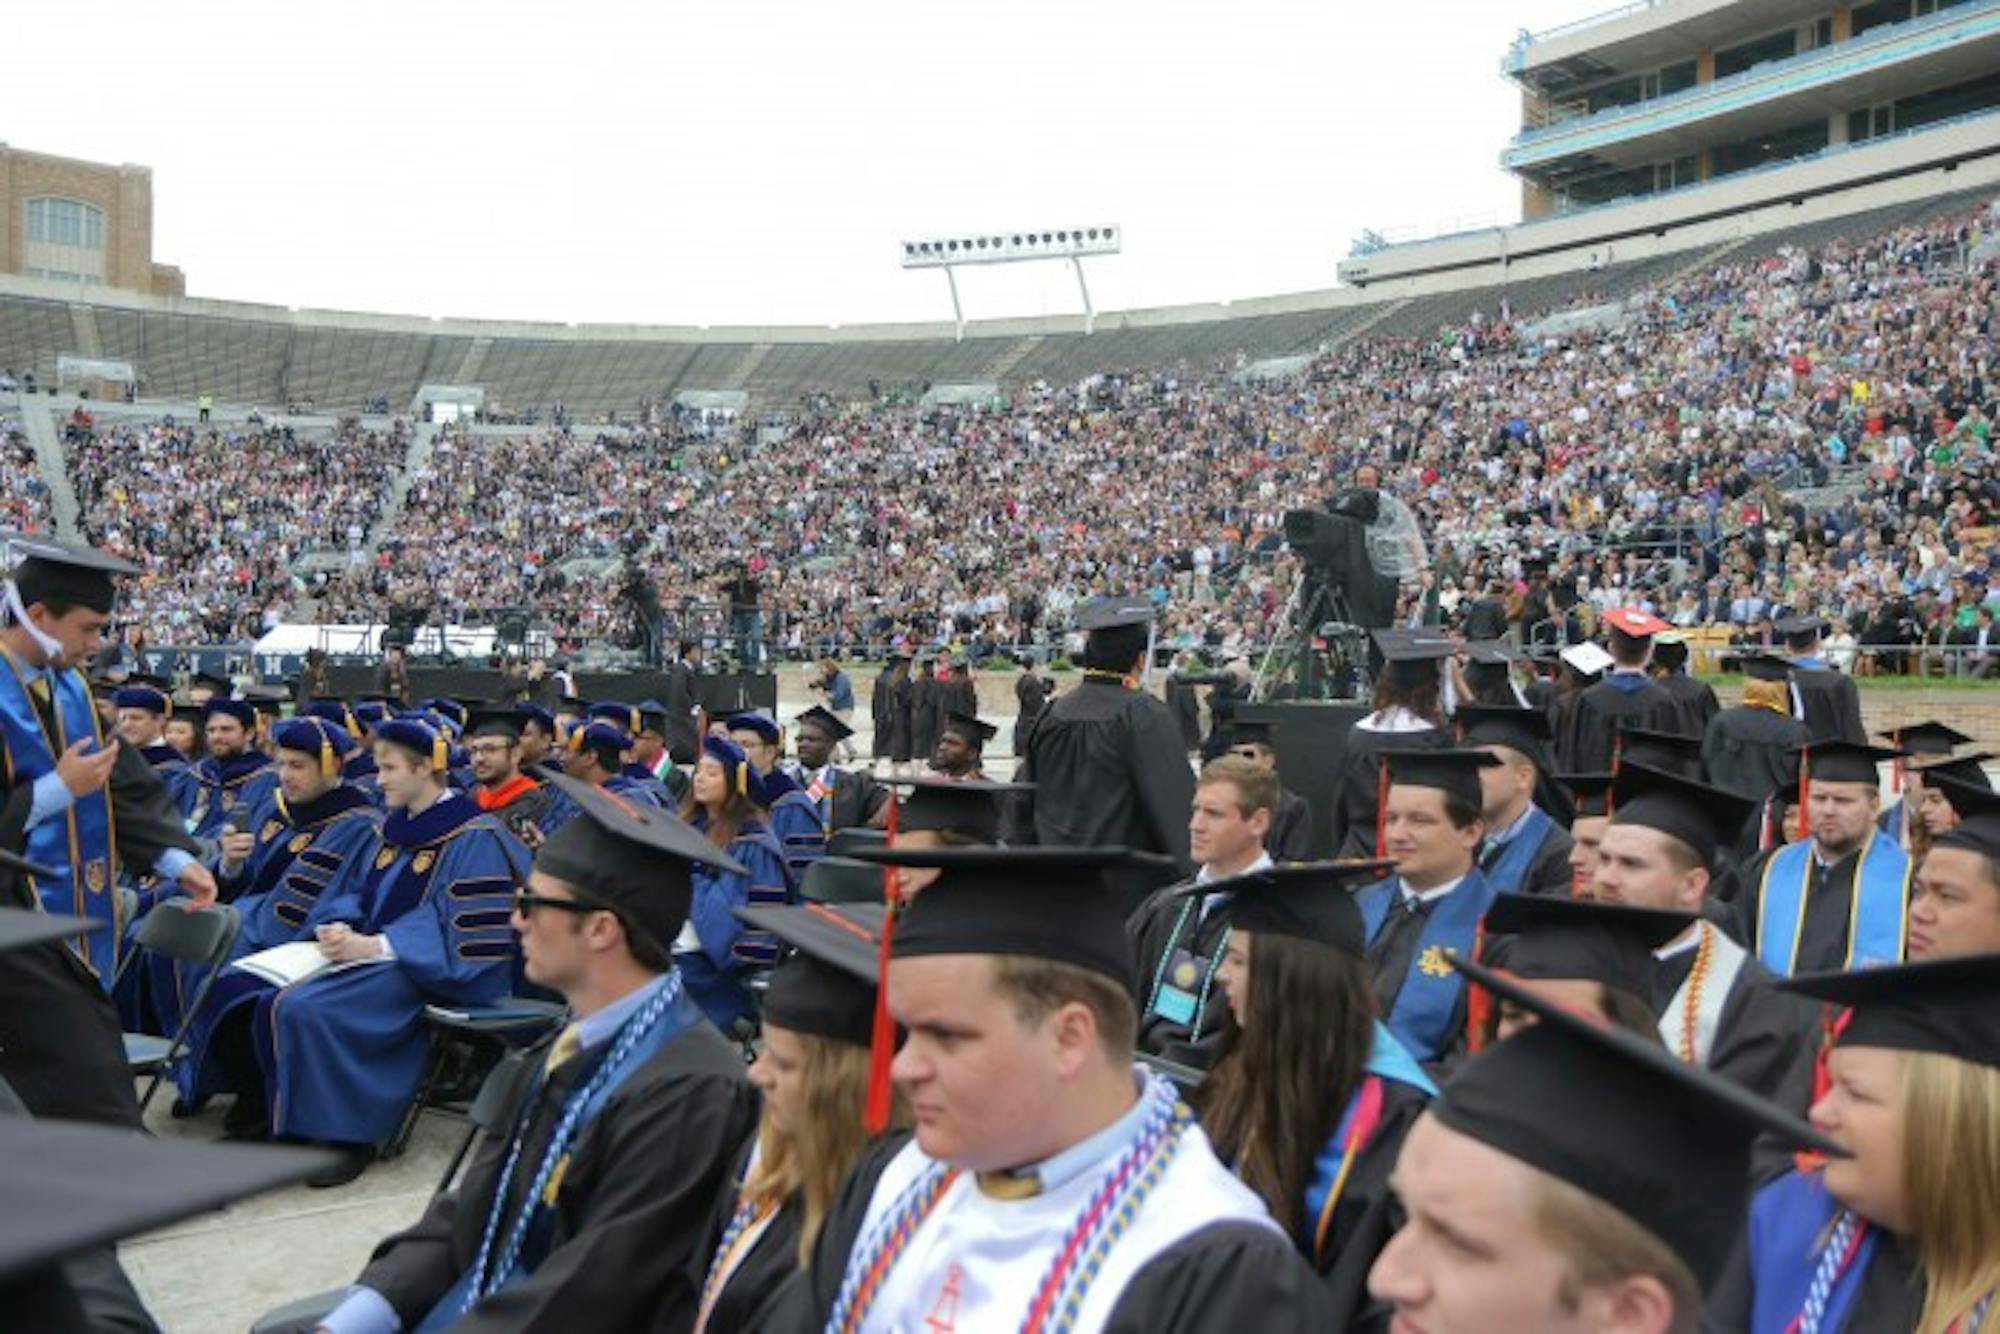 Students participate in a walk out during Vice President Mike Pence's speech at Commencement. Approximately 150 students, friends and family members participated in the walkout.